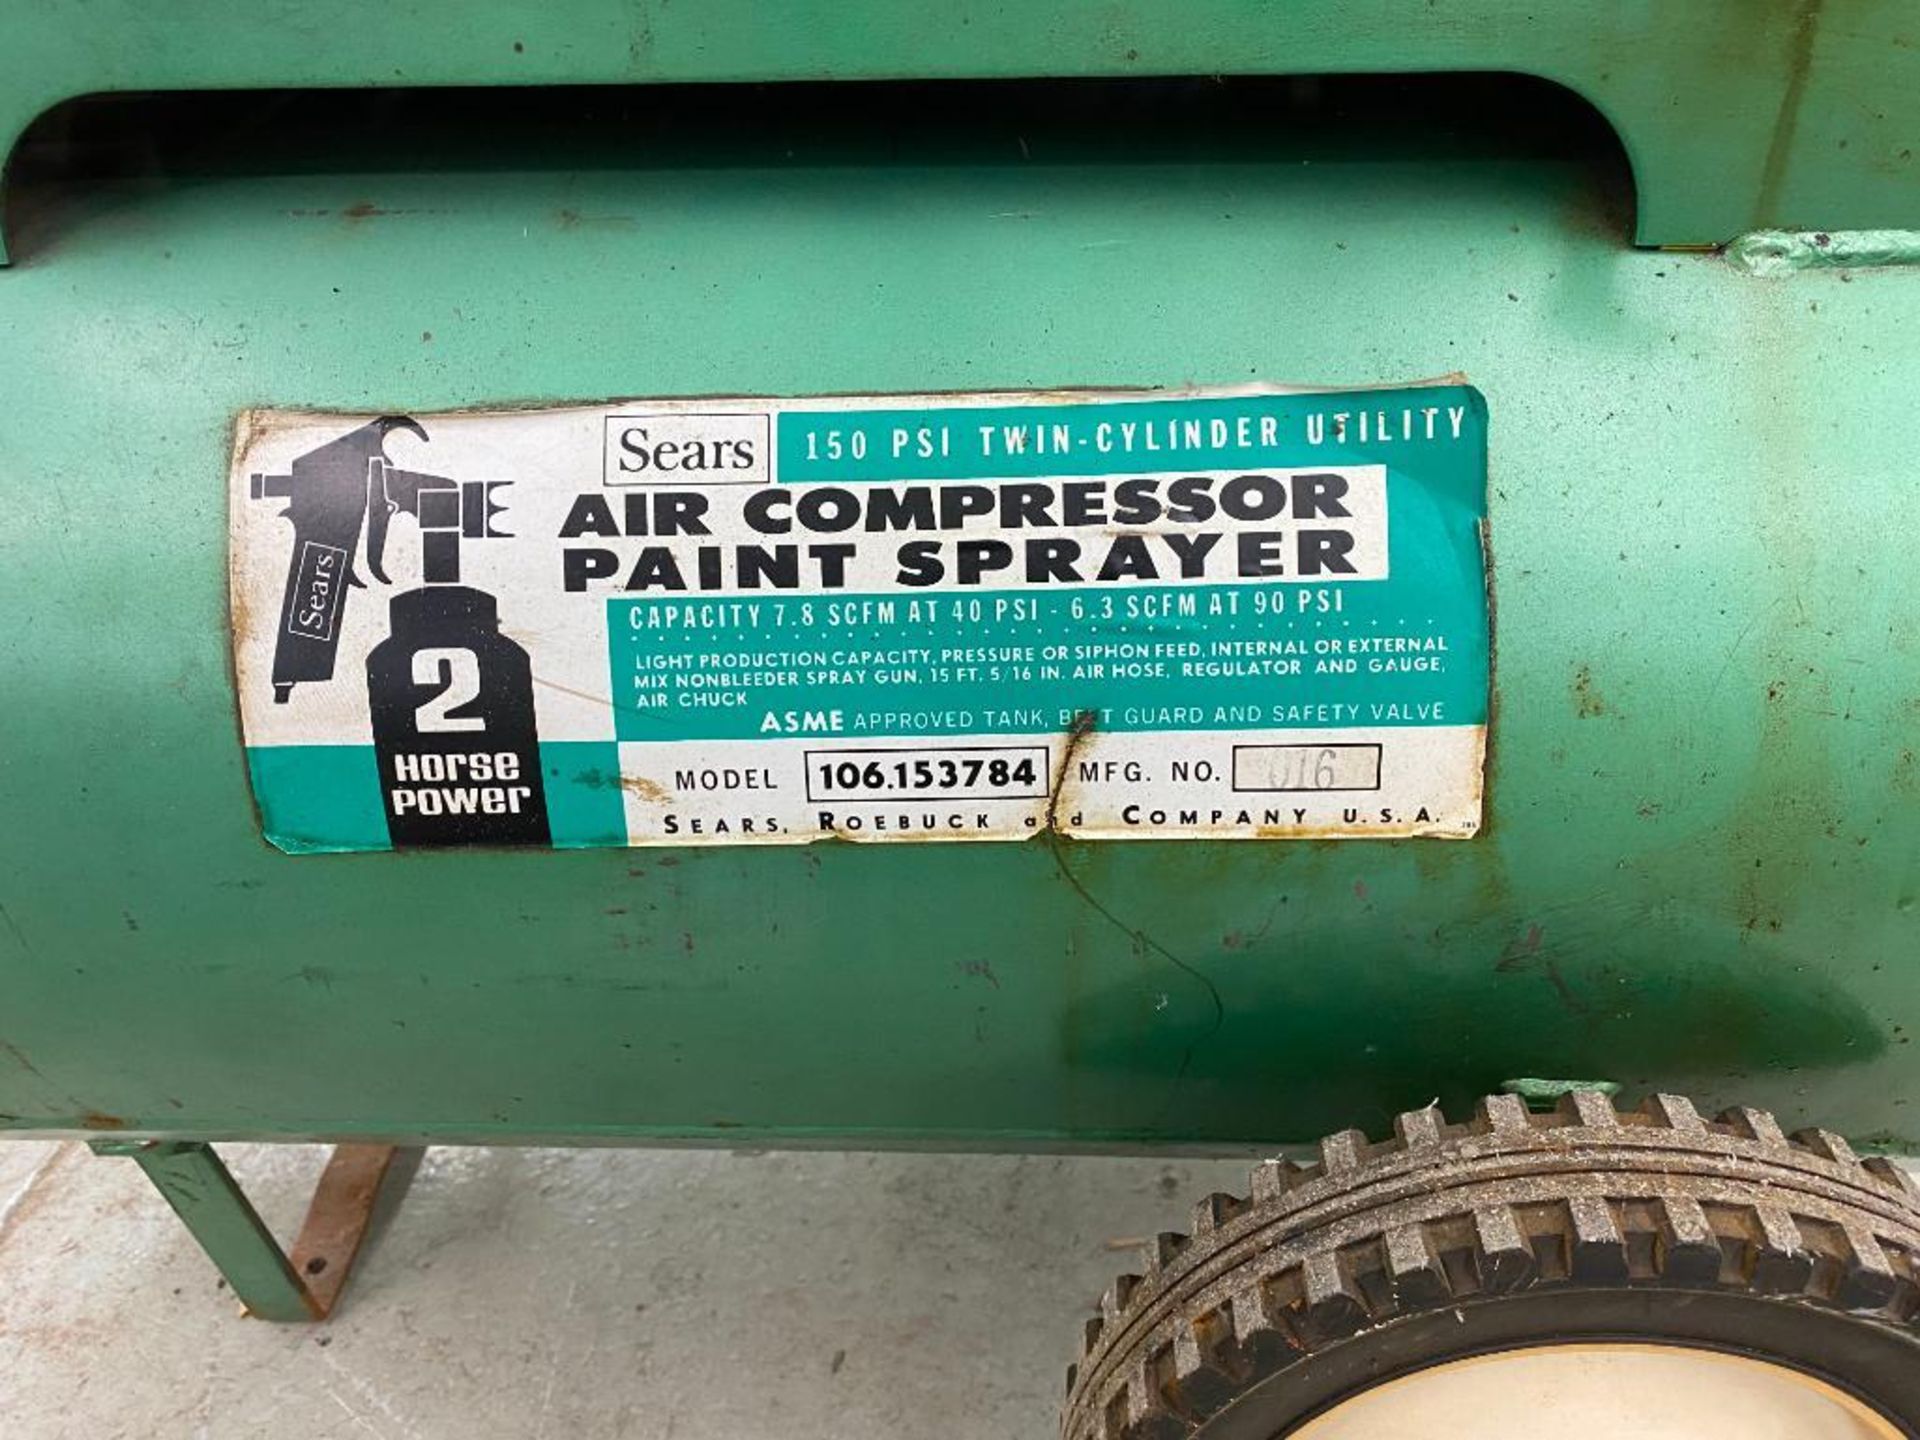 Sears 150 PSI Twin-Cylinder Air Compressor, 2 HP, Model 106.153784 - Image 3 of 3